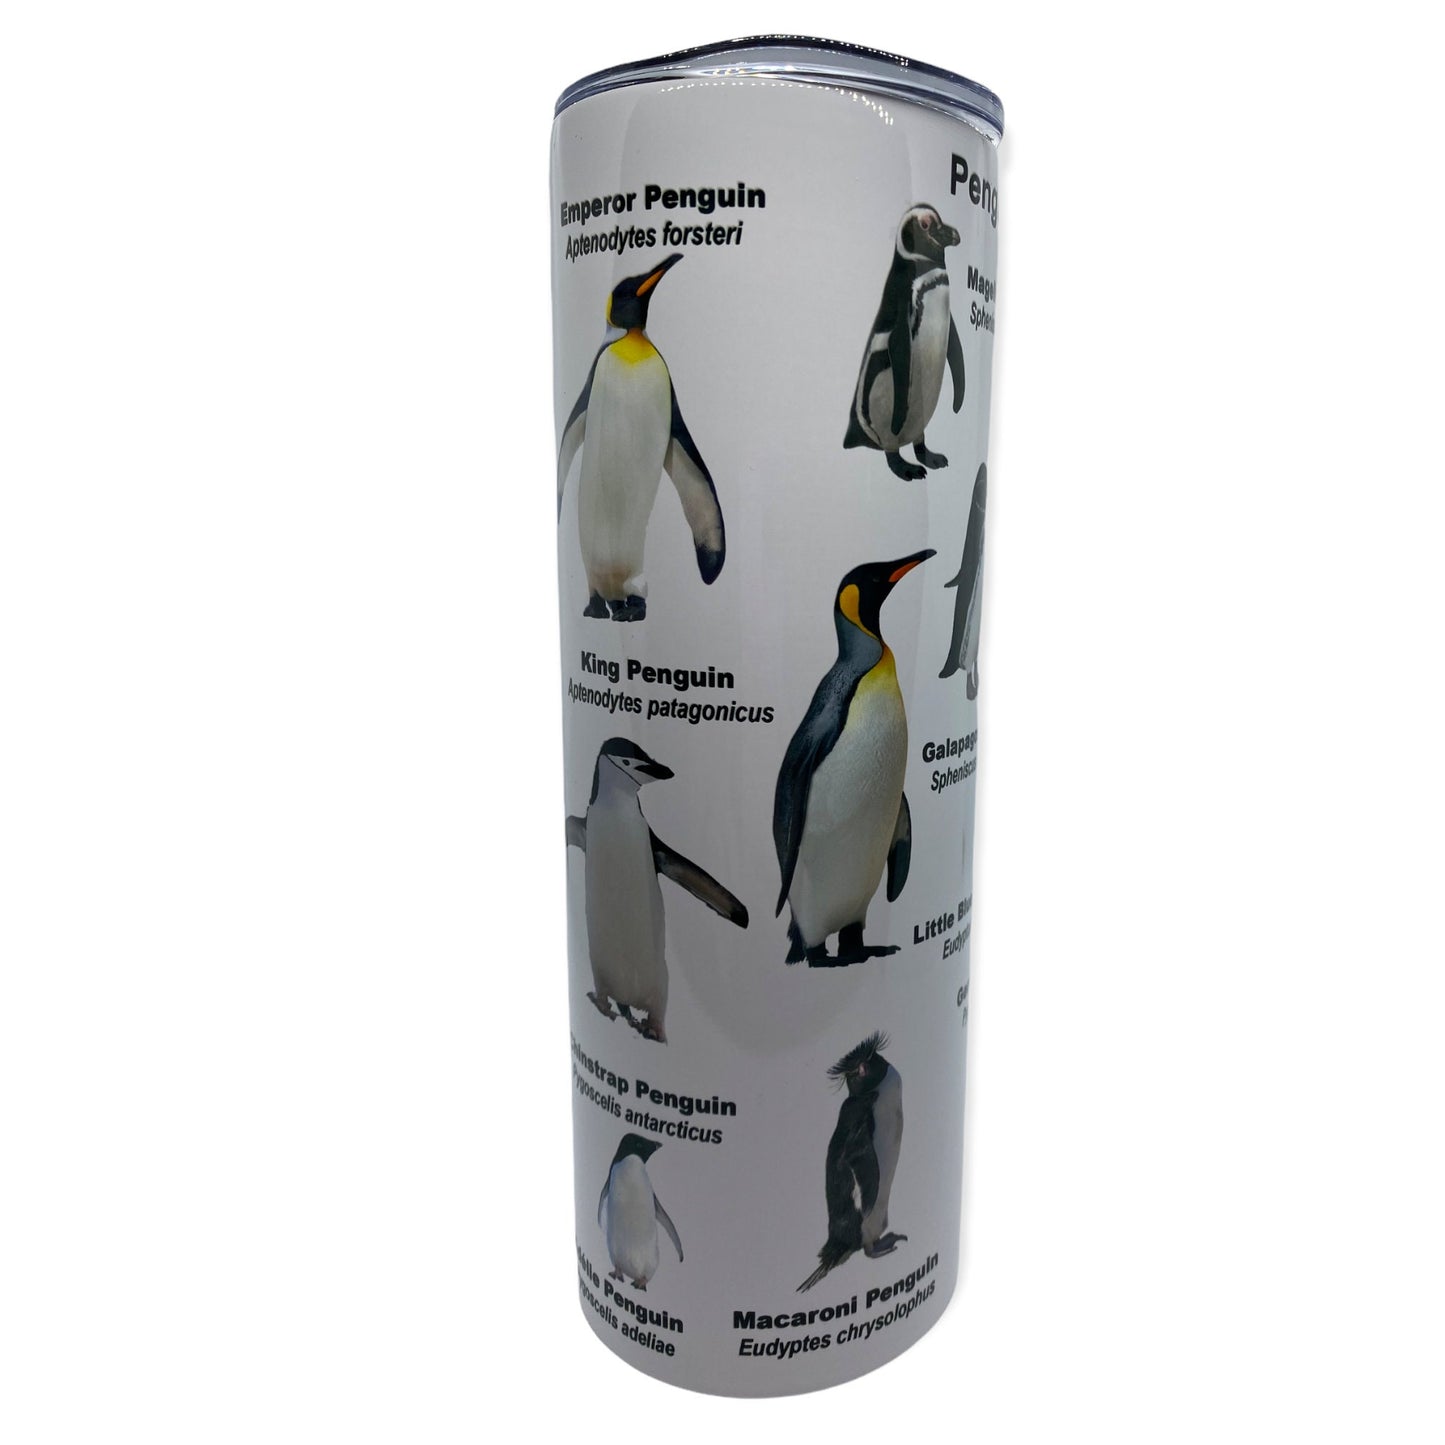 Penguins of the World Tumbler, Cup | 20oz Skinny Tumbler | Funny Gift for Wildlife Lover, Endangered Species, Conservation Facts